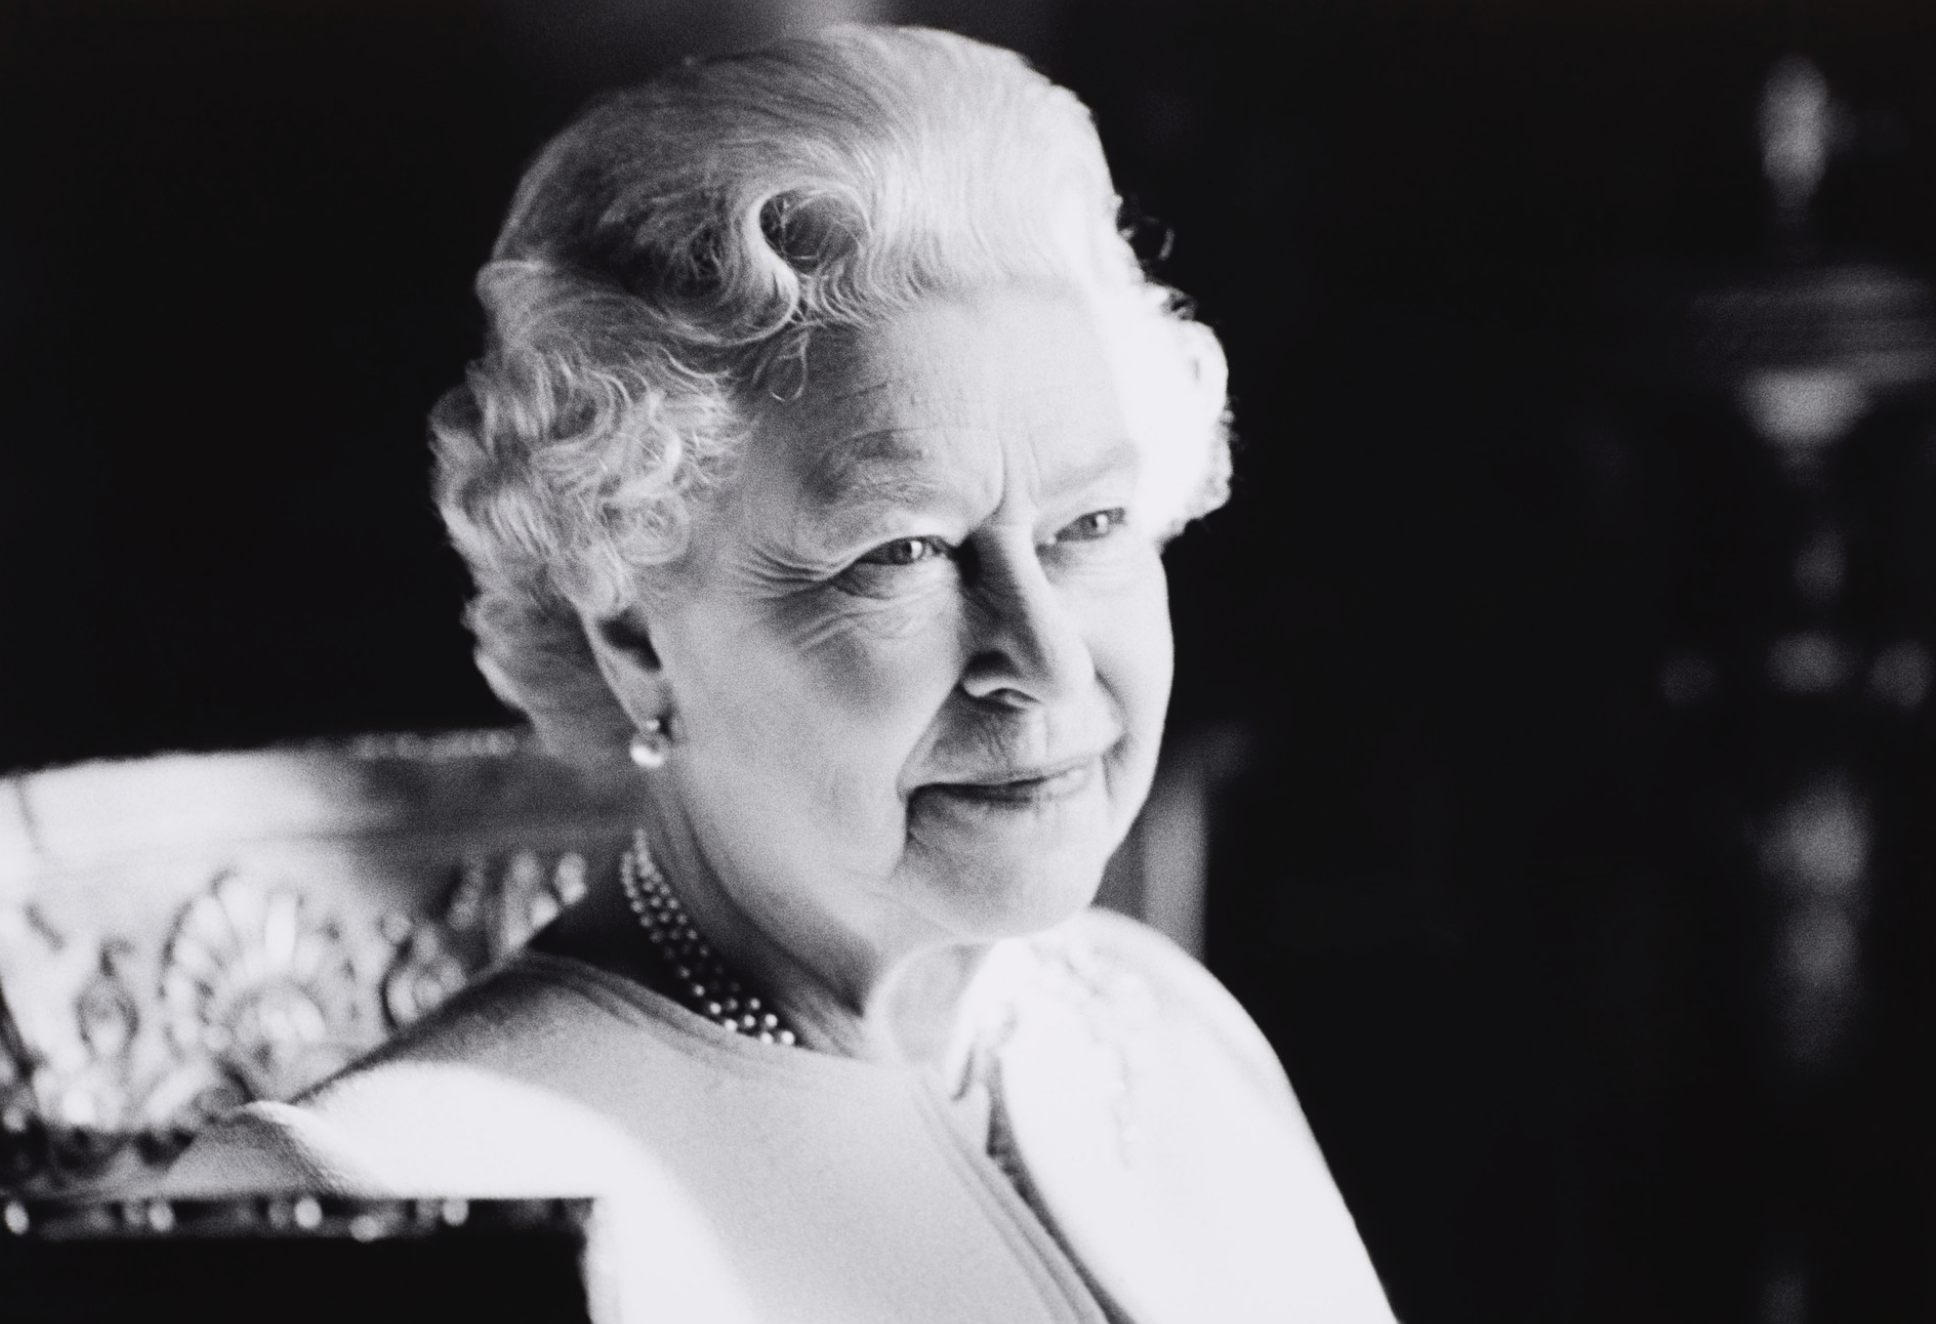 Arsenal: We are deeply saddened to hear of the passing of Her Majesty The Queen